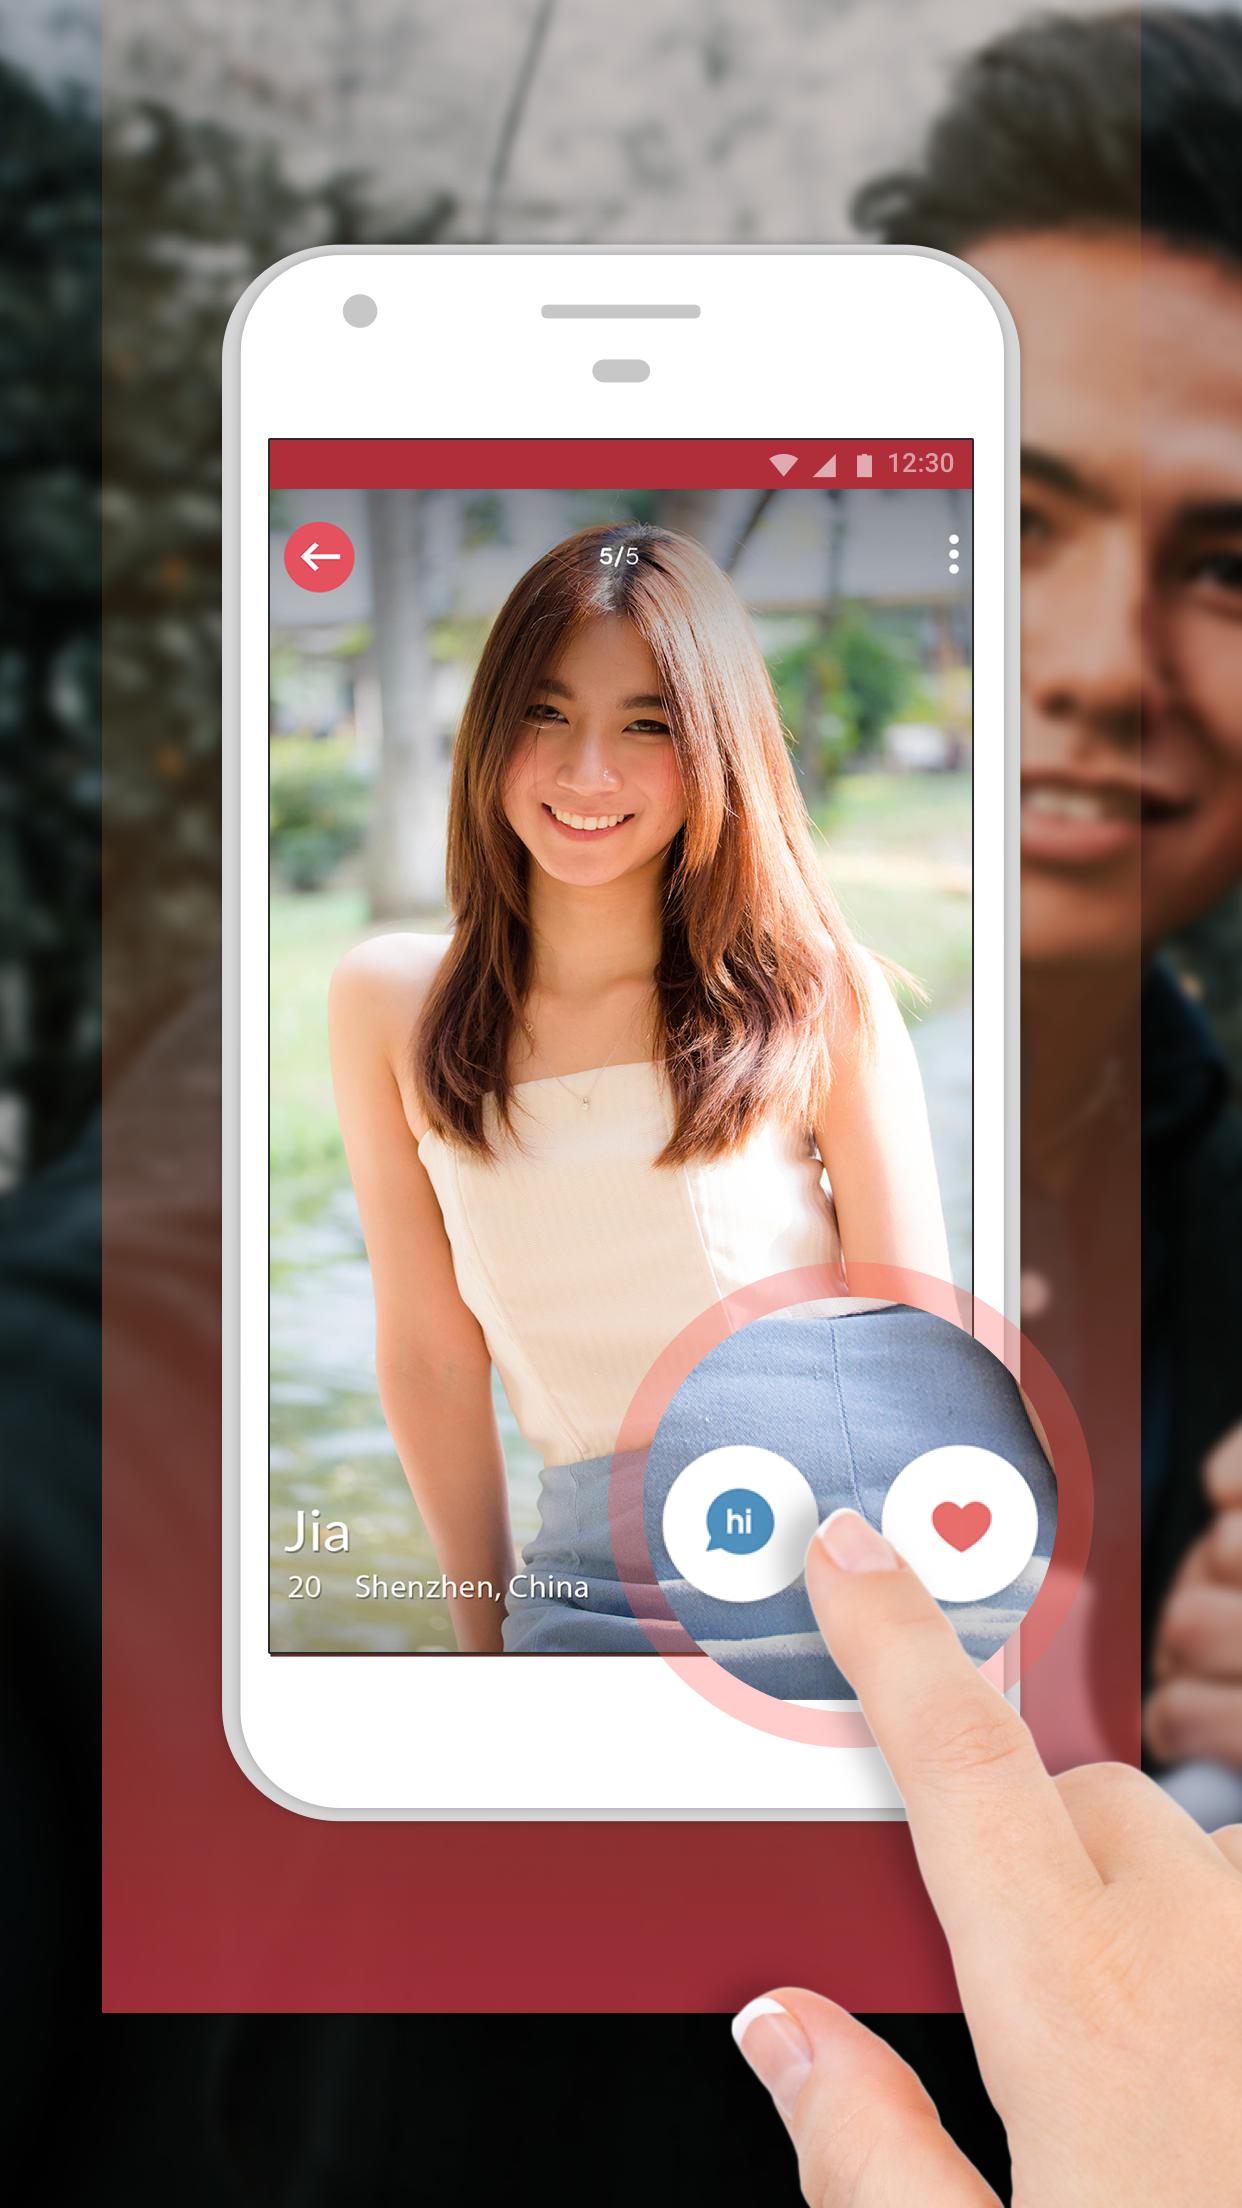 48 HQ Photos Chinese Dating App Free : AsianDate: Date & Chat App APK Free Social Android App ...